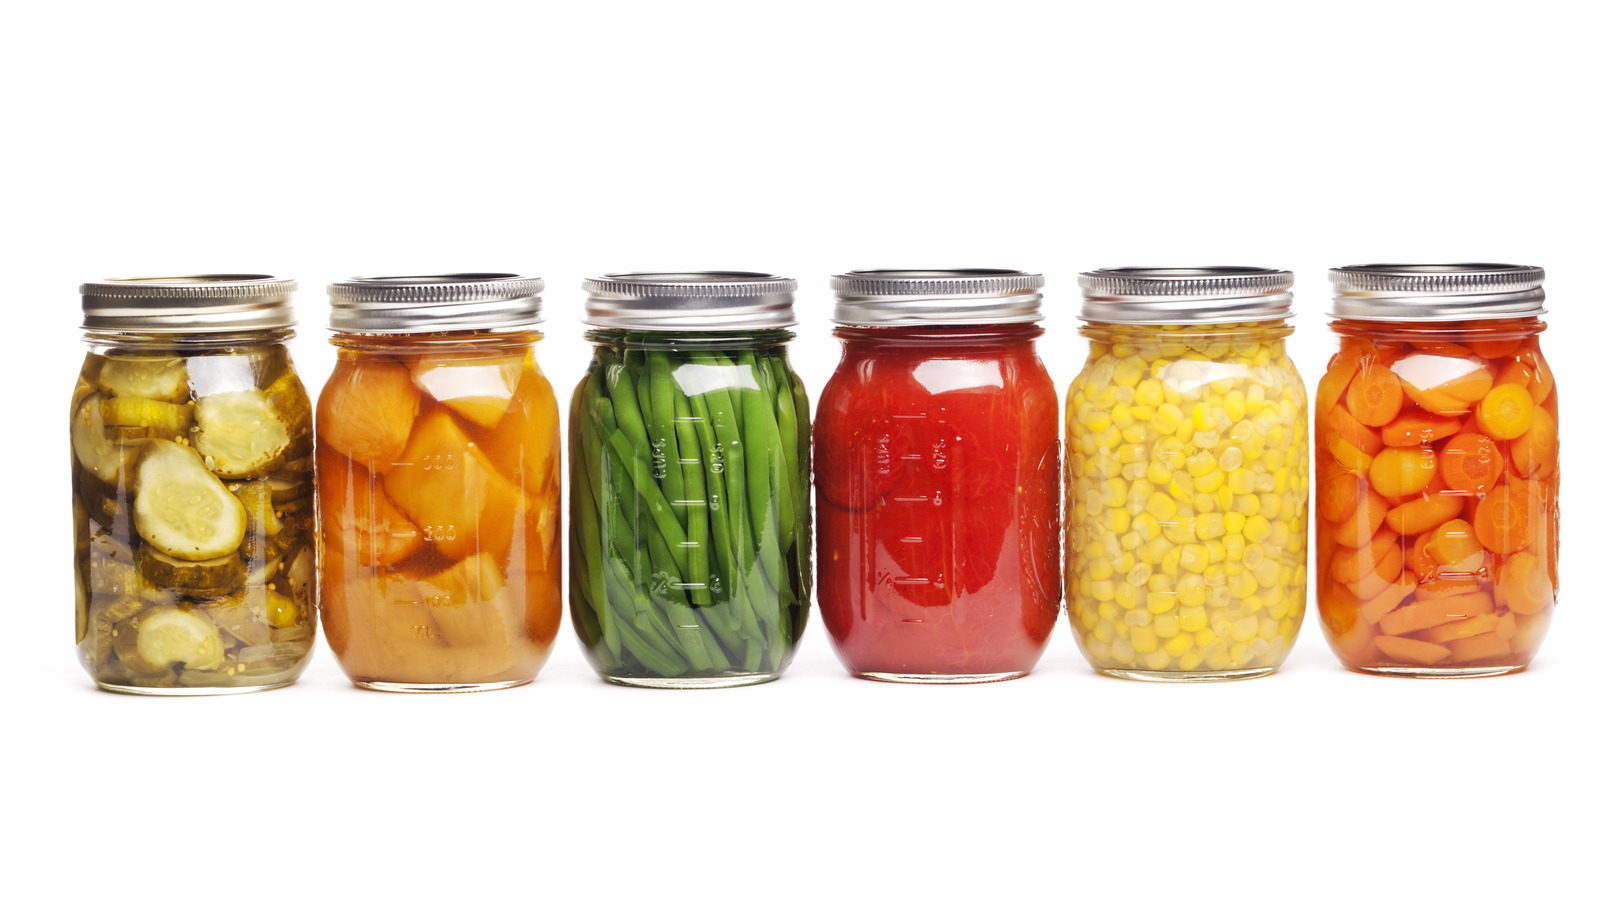 https://www.thedailymeal.com/img/gallery/pressure-canning-vs-water-bath-canning-which-is-the-best-method/l-intro-1699650794.jpg